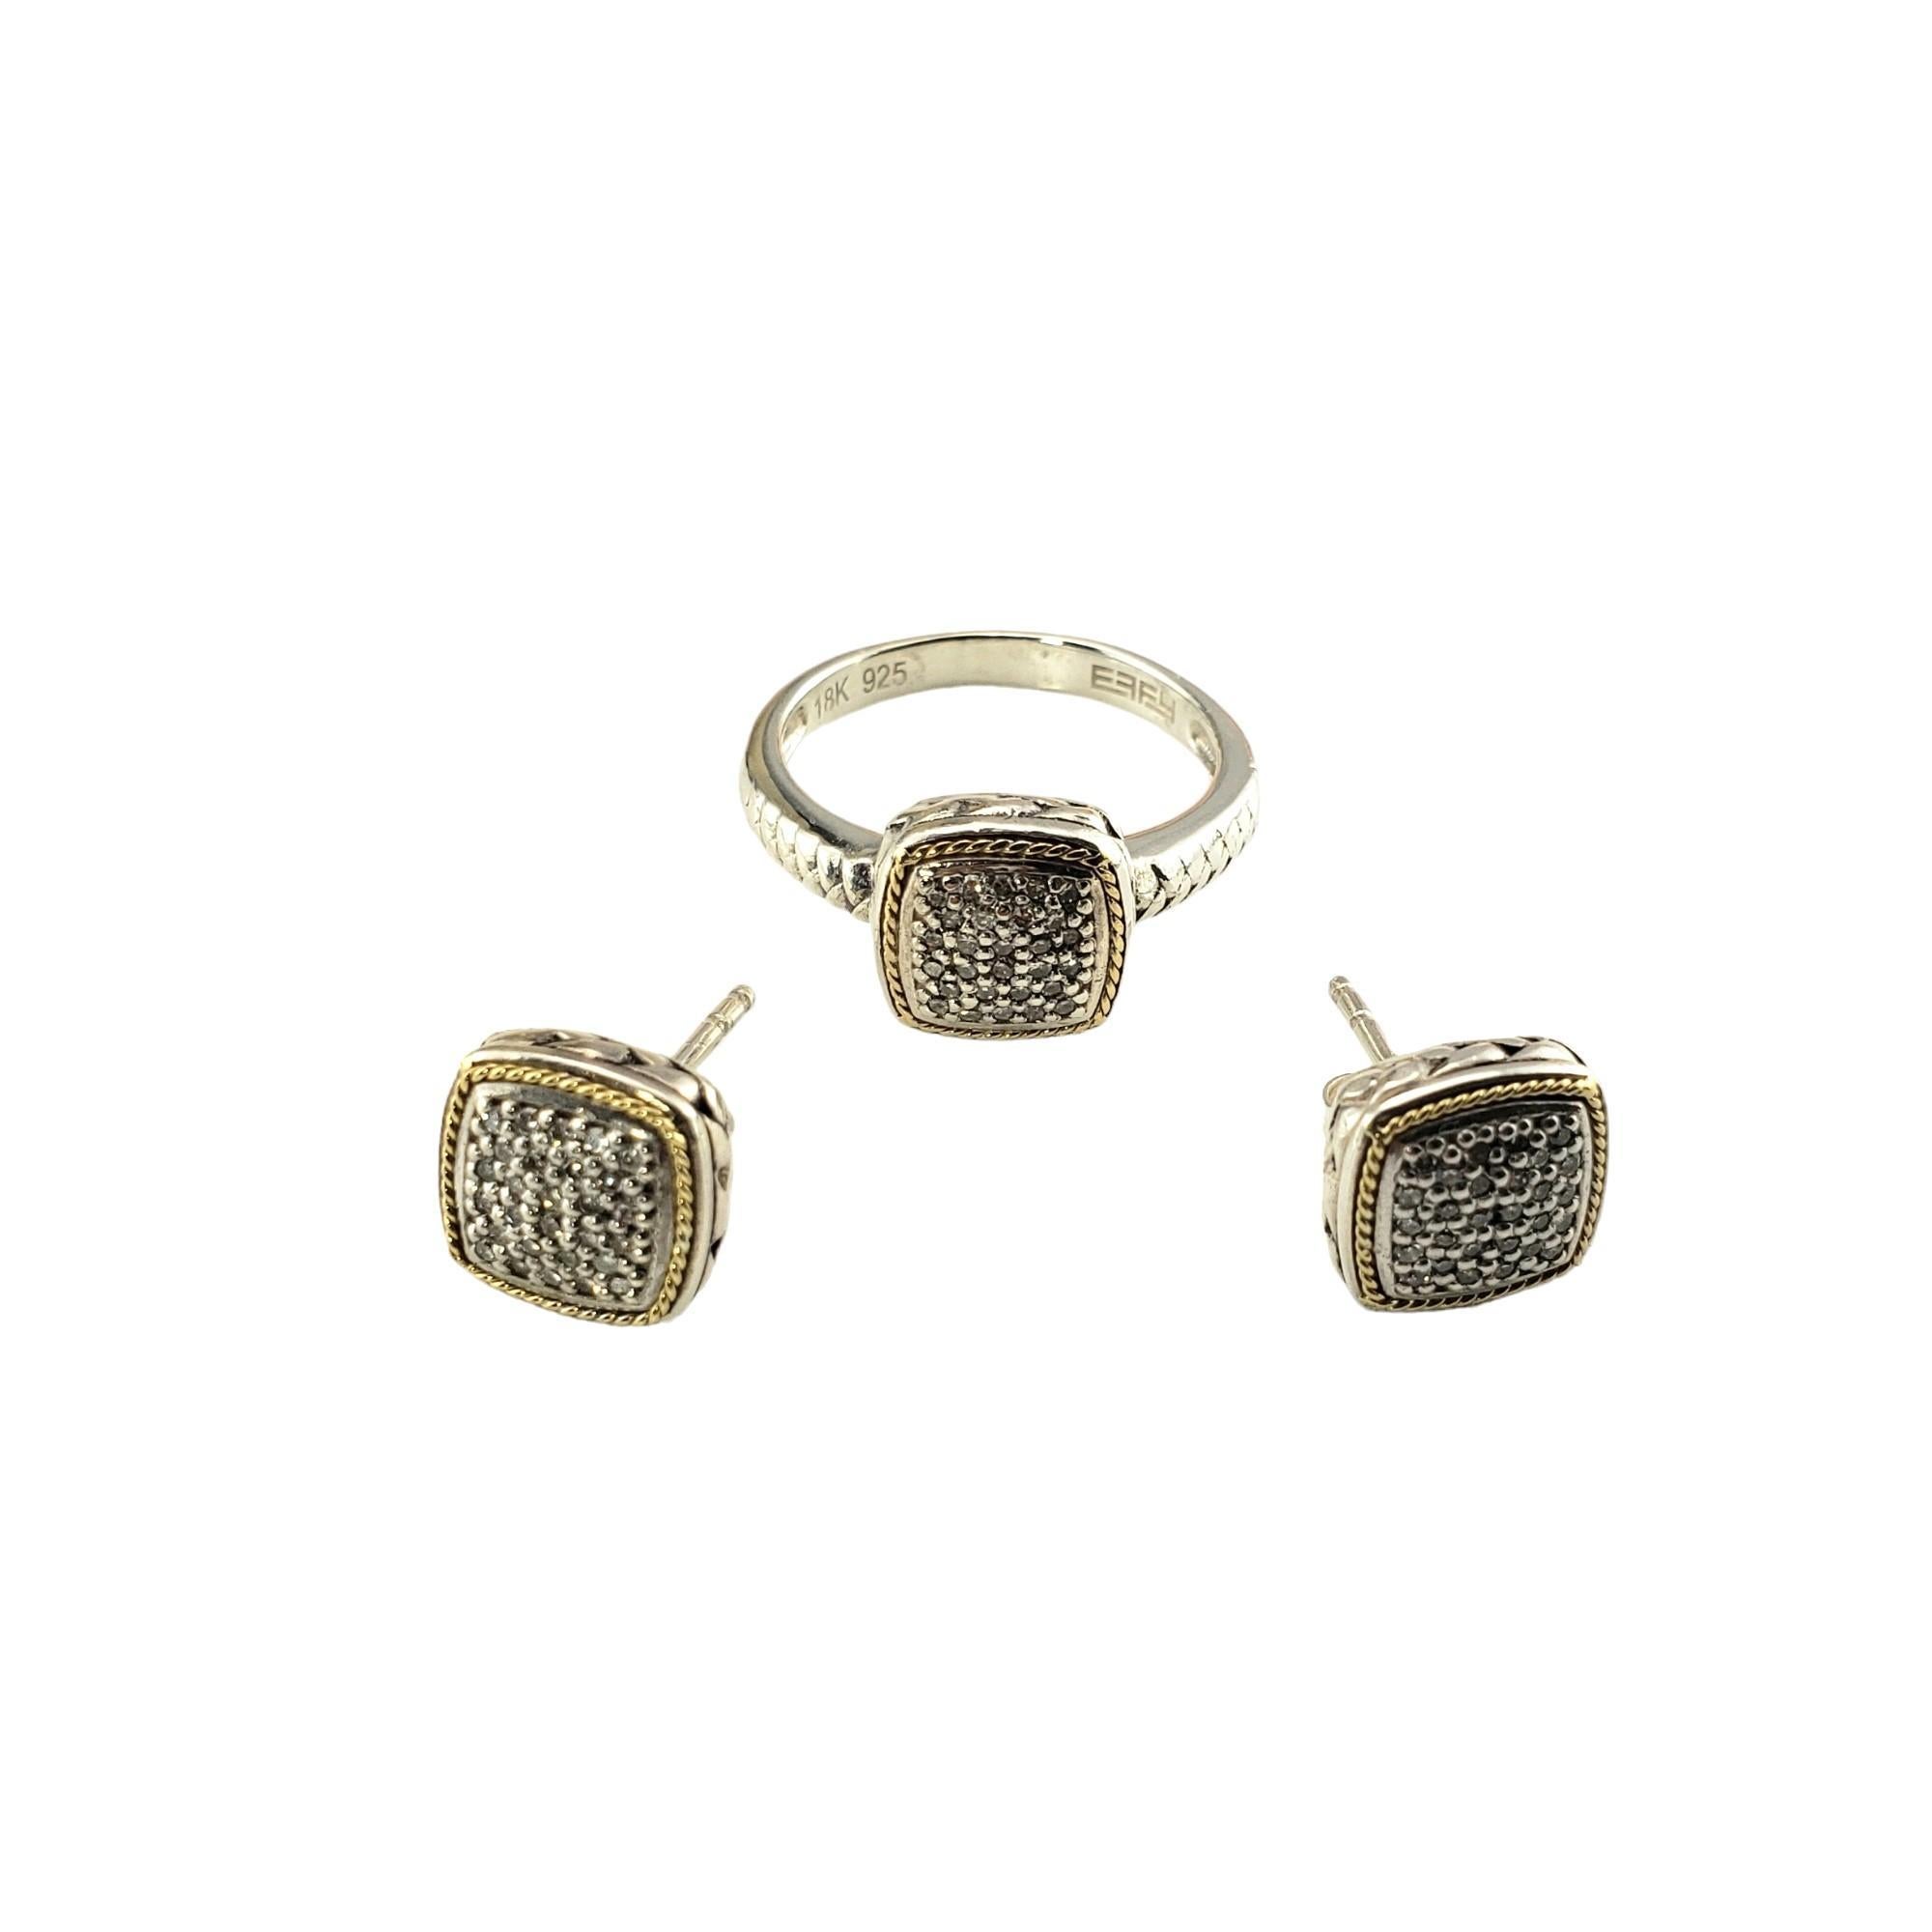 Effy Sterling Silver and 18K Yellow Gold and Diamond Ring and Earring Set-

This lovely ring features pave set diamonds set beautifully detailed sterling silver and 18K yellow gold.  Matching earrings included.

Approximate total diamond weight: .20